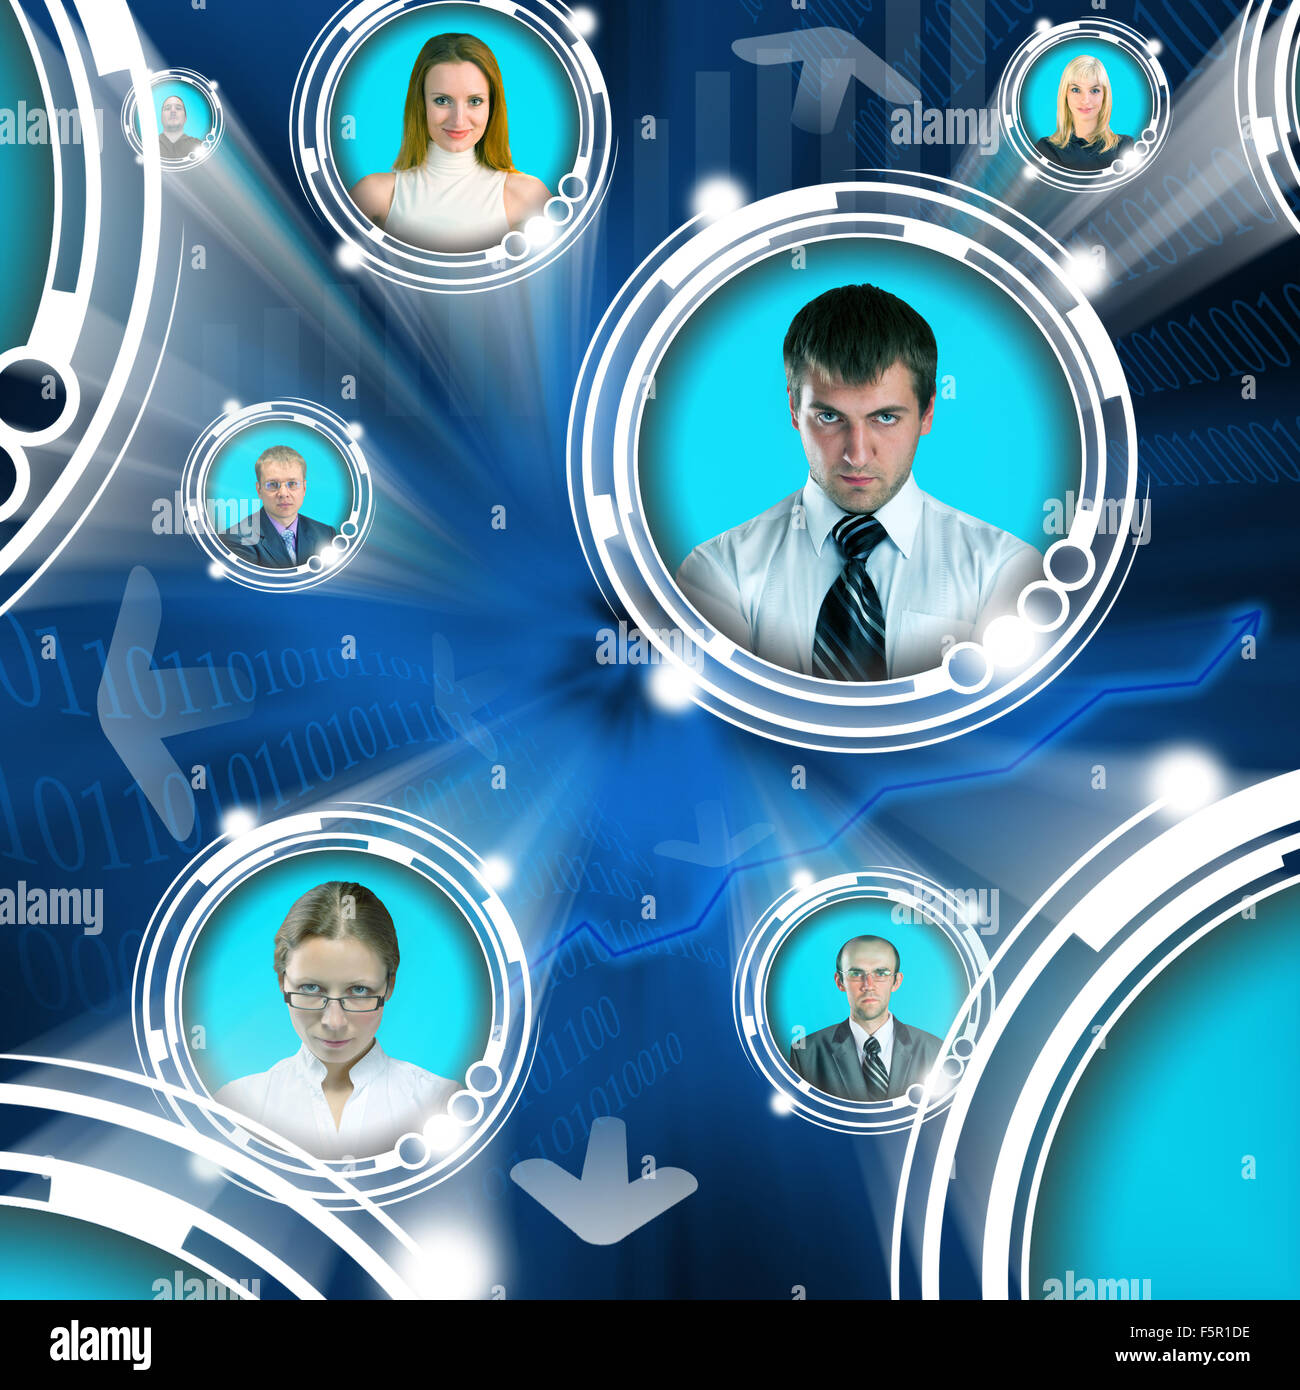 Abstract conceptual illustration of business people in cyberspace Stock Photo